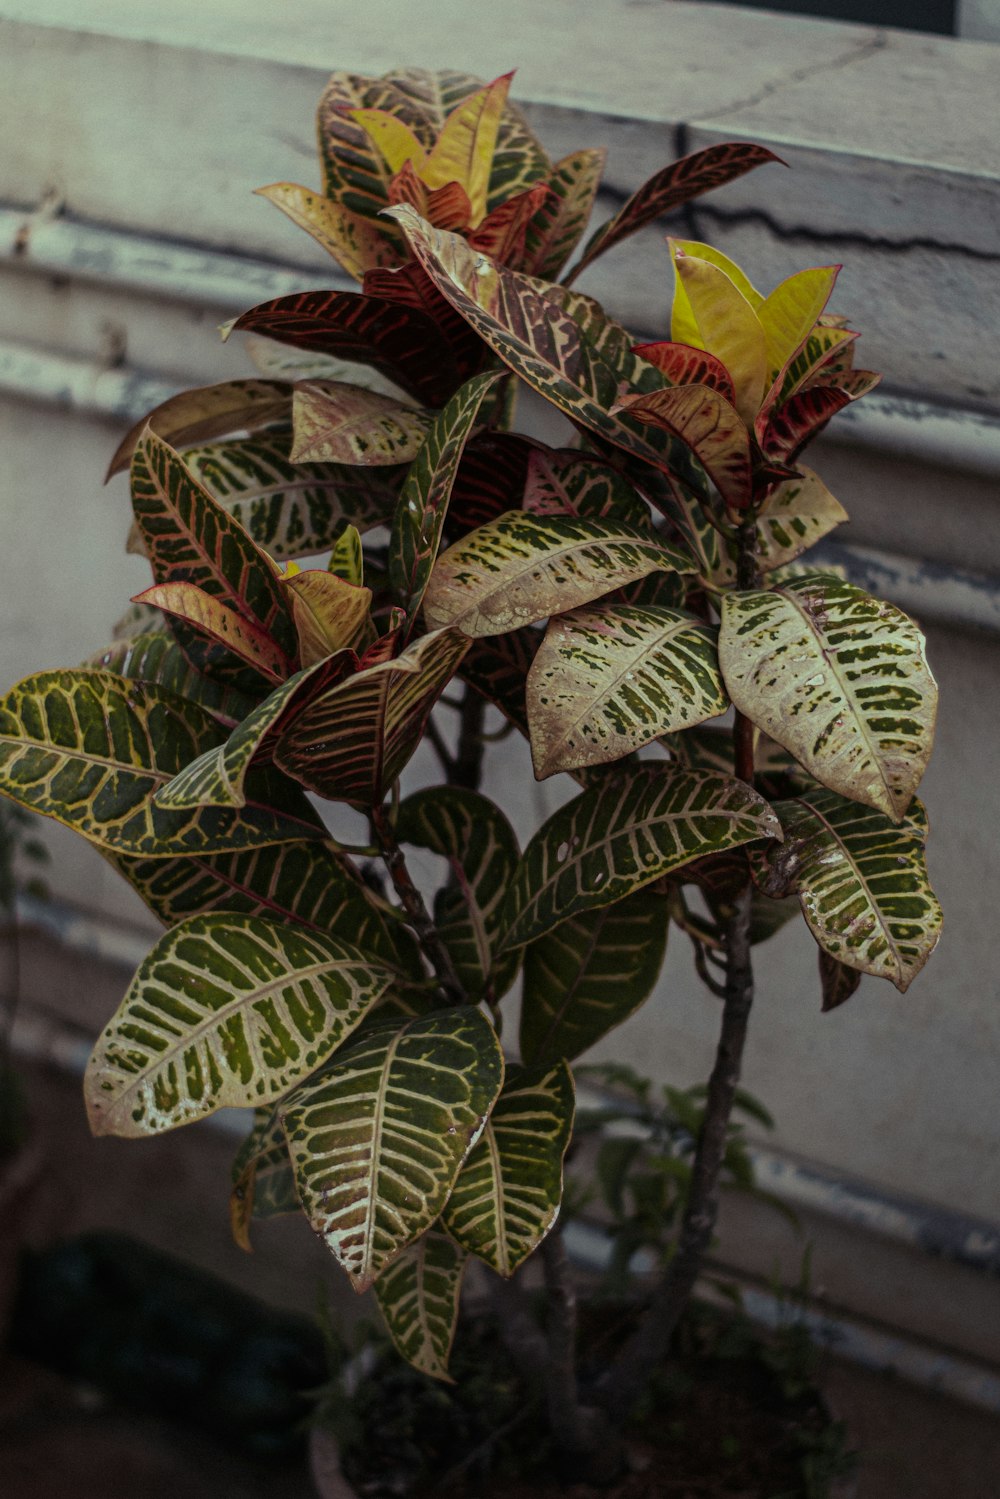 a potted plant with yellow and green leaves